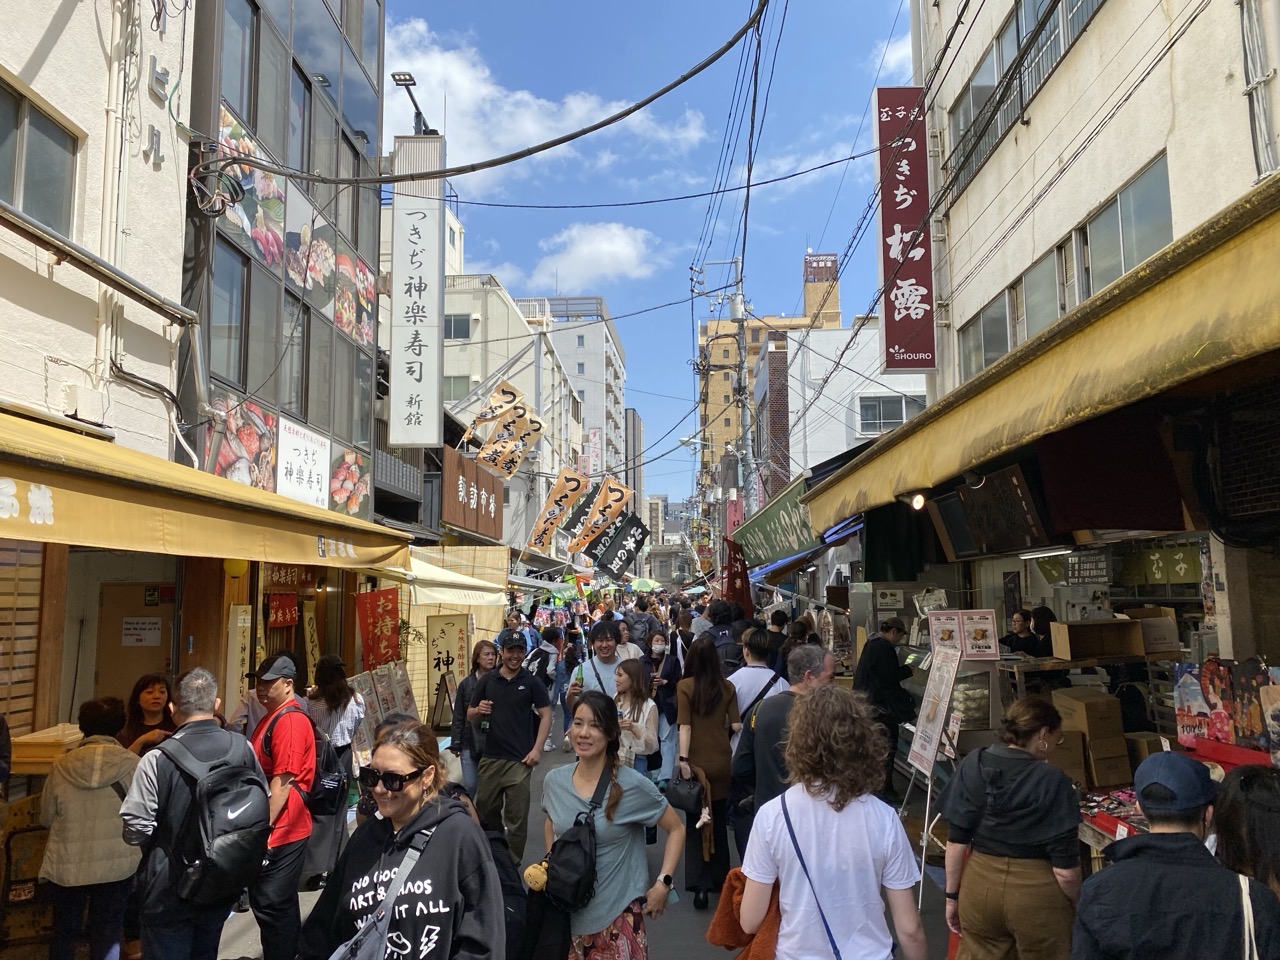 An image of Nishiki fish market, with lots of people. Lucy is in the foreground